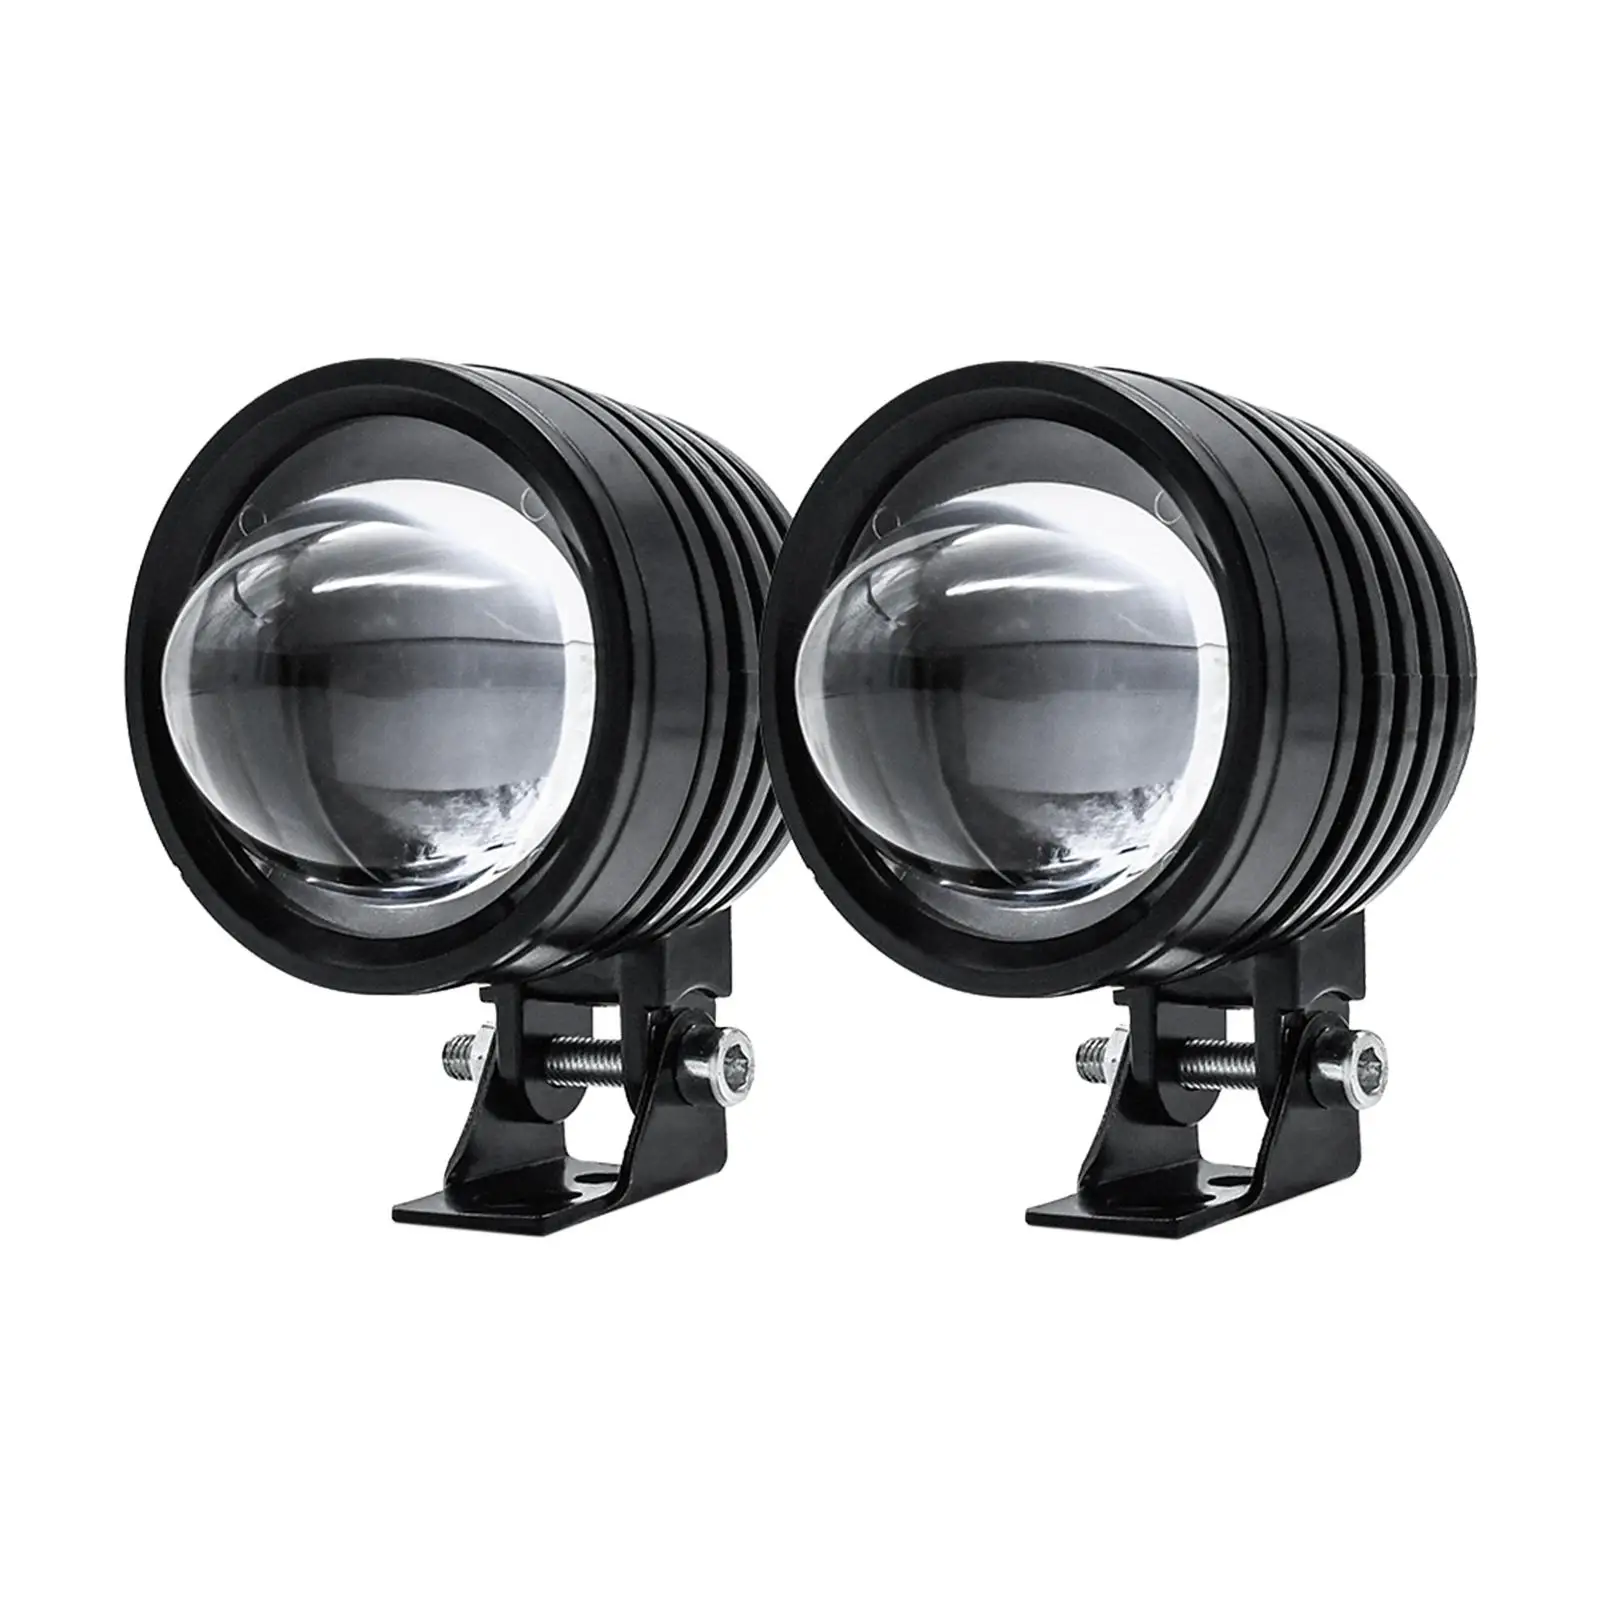 2 Pieces Motorcycle Headlight Assembly IP67 Waterproof Driving Fog Spot Lamp